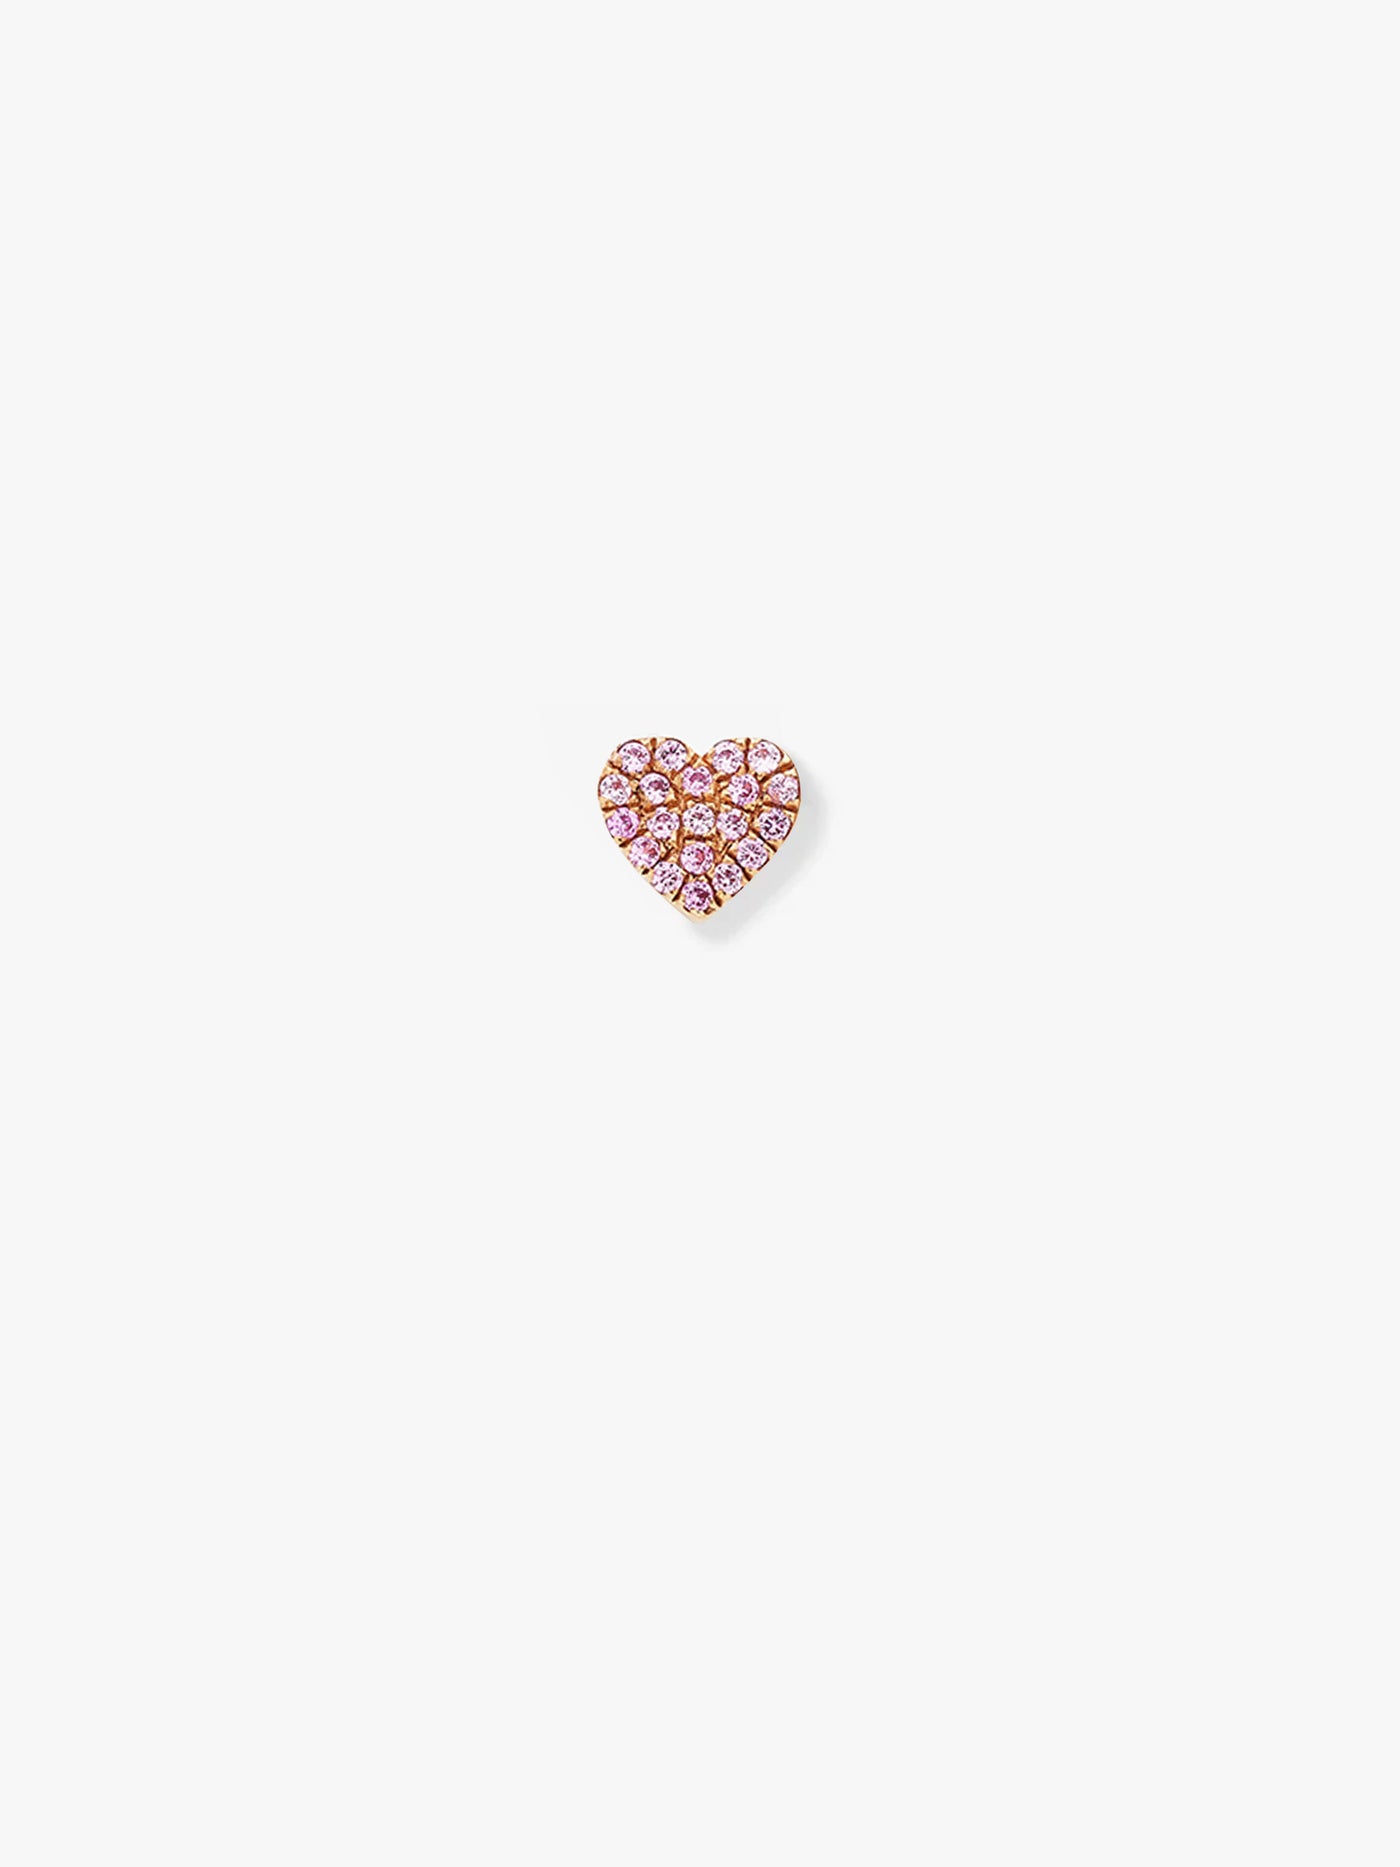 Heart Stud Single Earring in Pink Sapphire and 18k Rose Gold